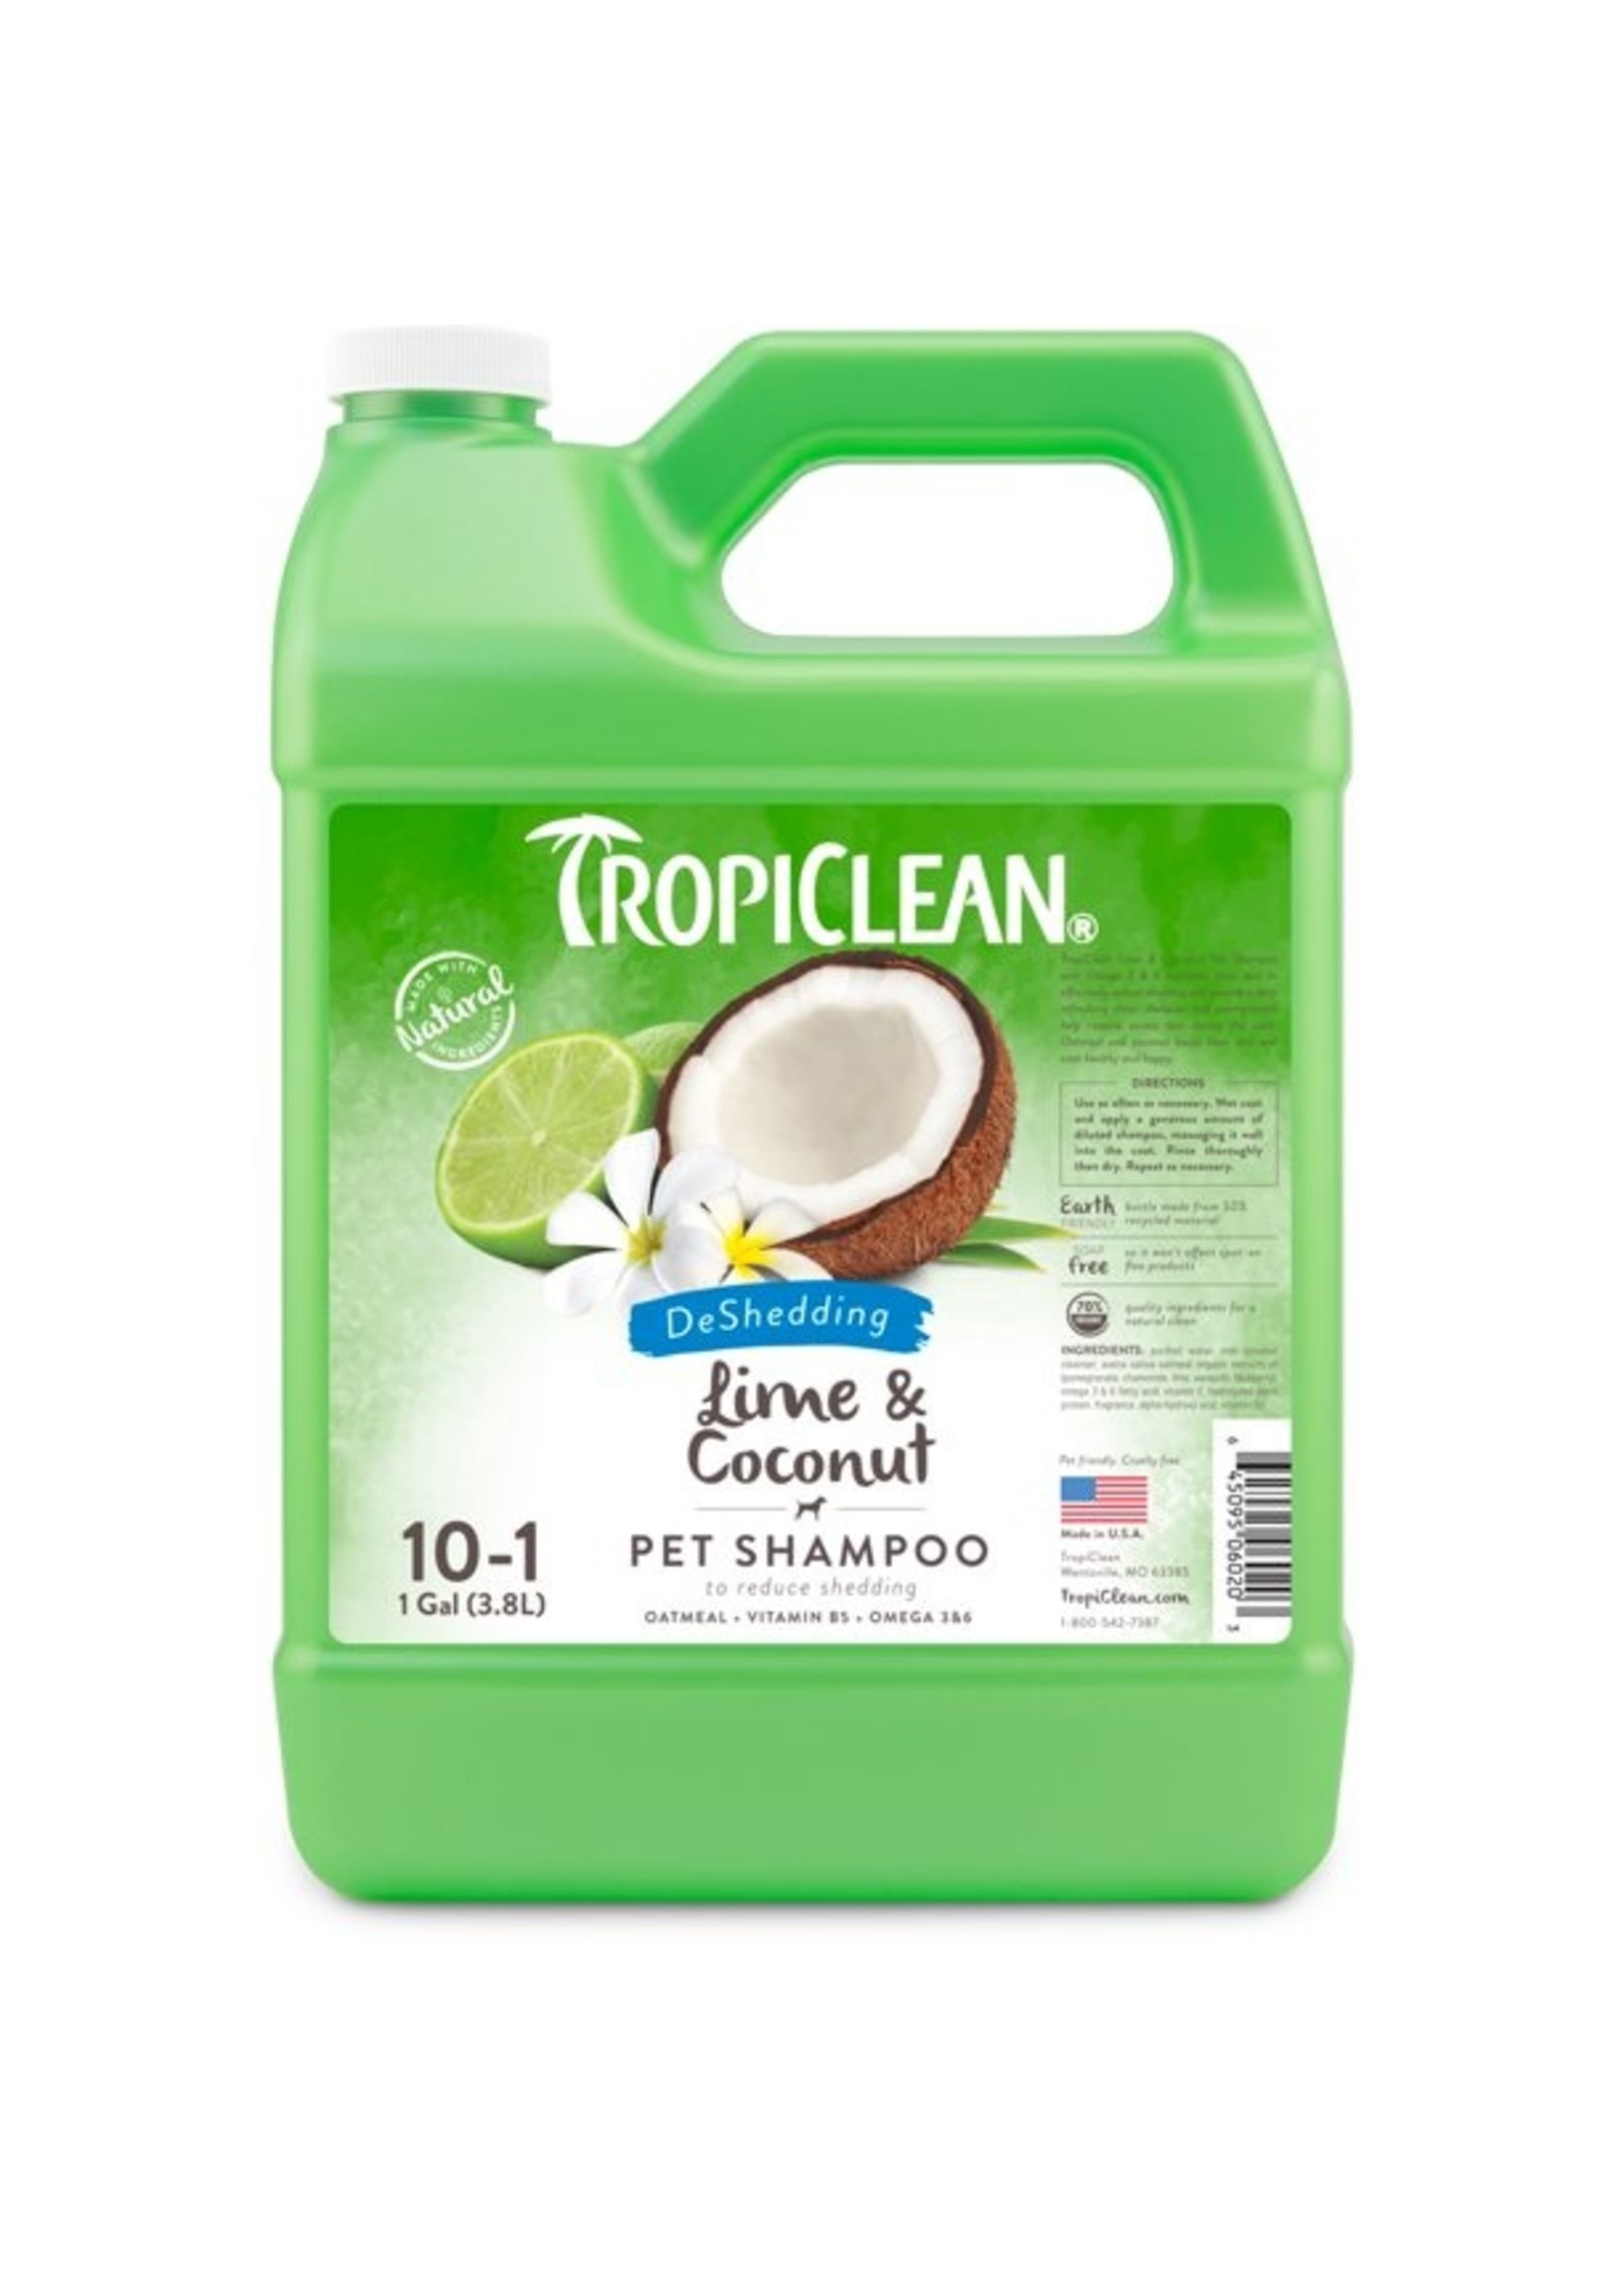 Tropiclean Tropiclean Lime and Coconut Shed Control Shampoo  1 Gallon